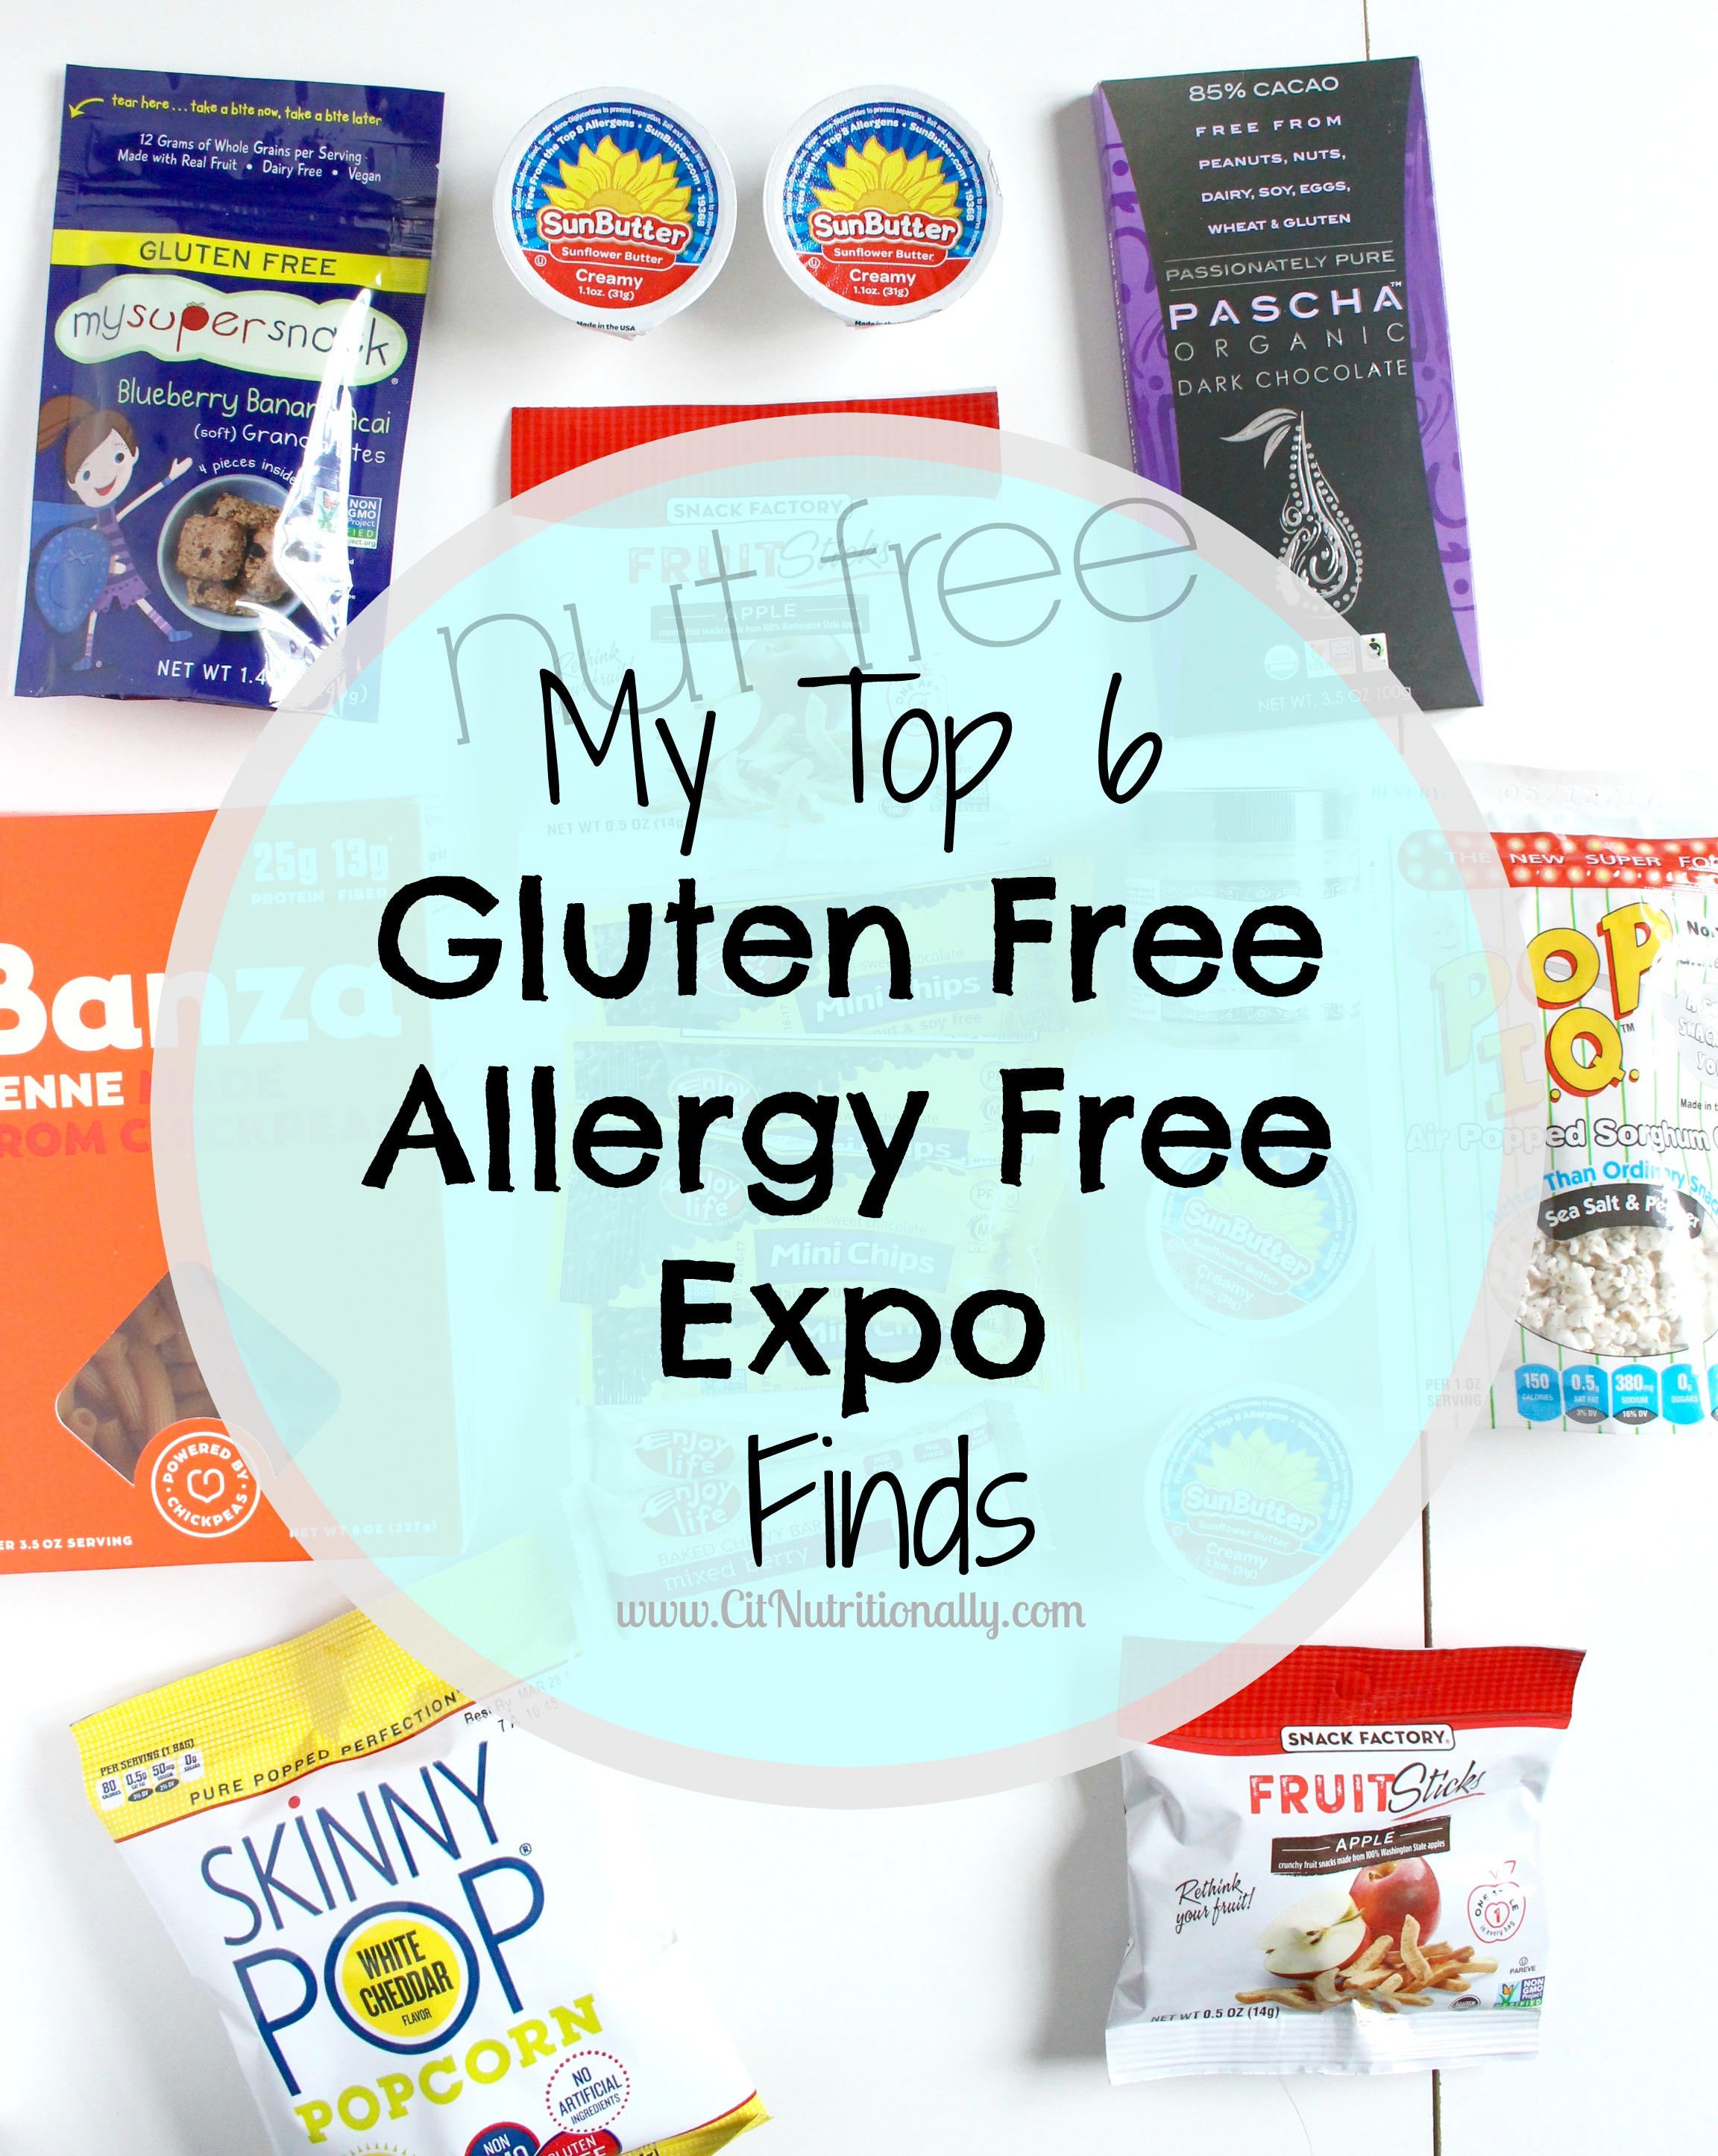 My Top 6 Gluten Free Allergy Free Expo Finds {nut free} | C it Nutritionally